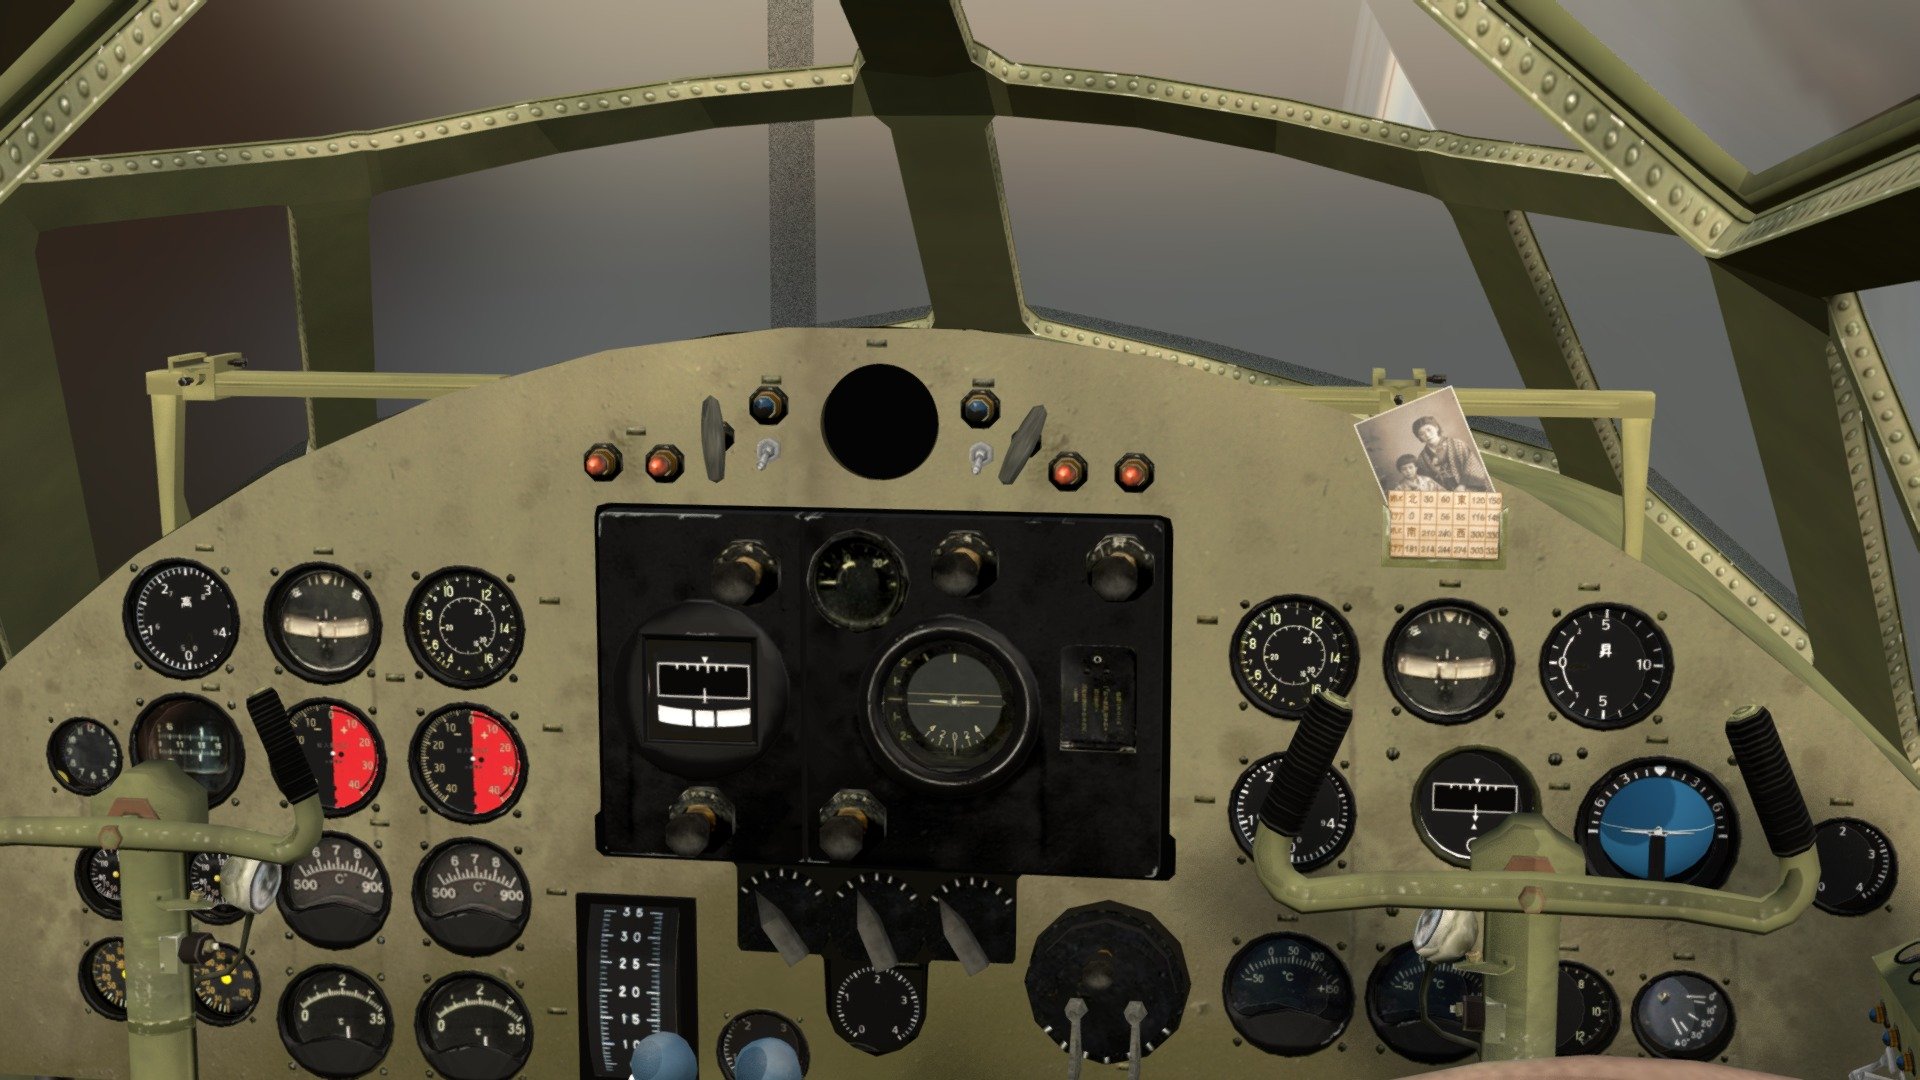 Cockpit for a plane which is to be used in a Flight simulator game.
I made the cockpit model to fit into an aeroplane model provided to me.
Then made a new texture for the plane model 3d model